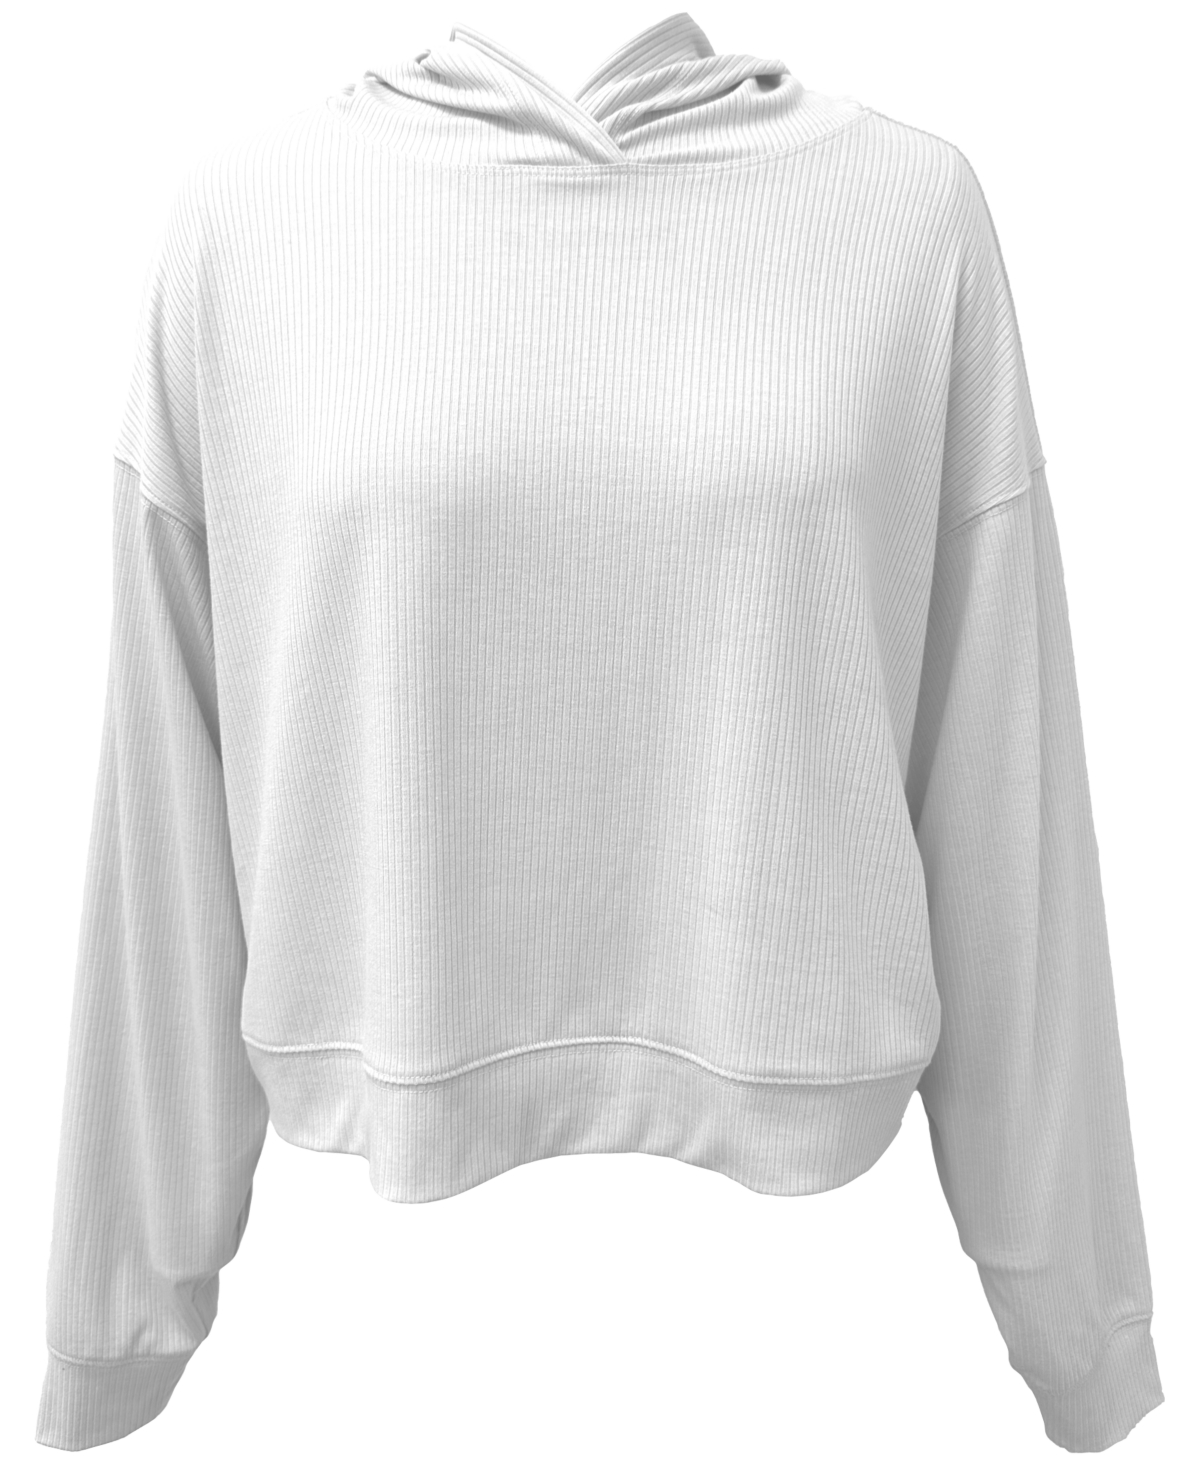 Women's Ribbed Drop-Shoulder Hoodie, Created for Macy's - Winter Whi